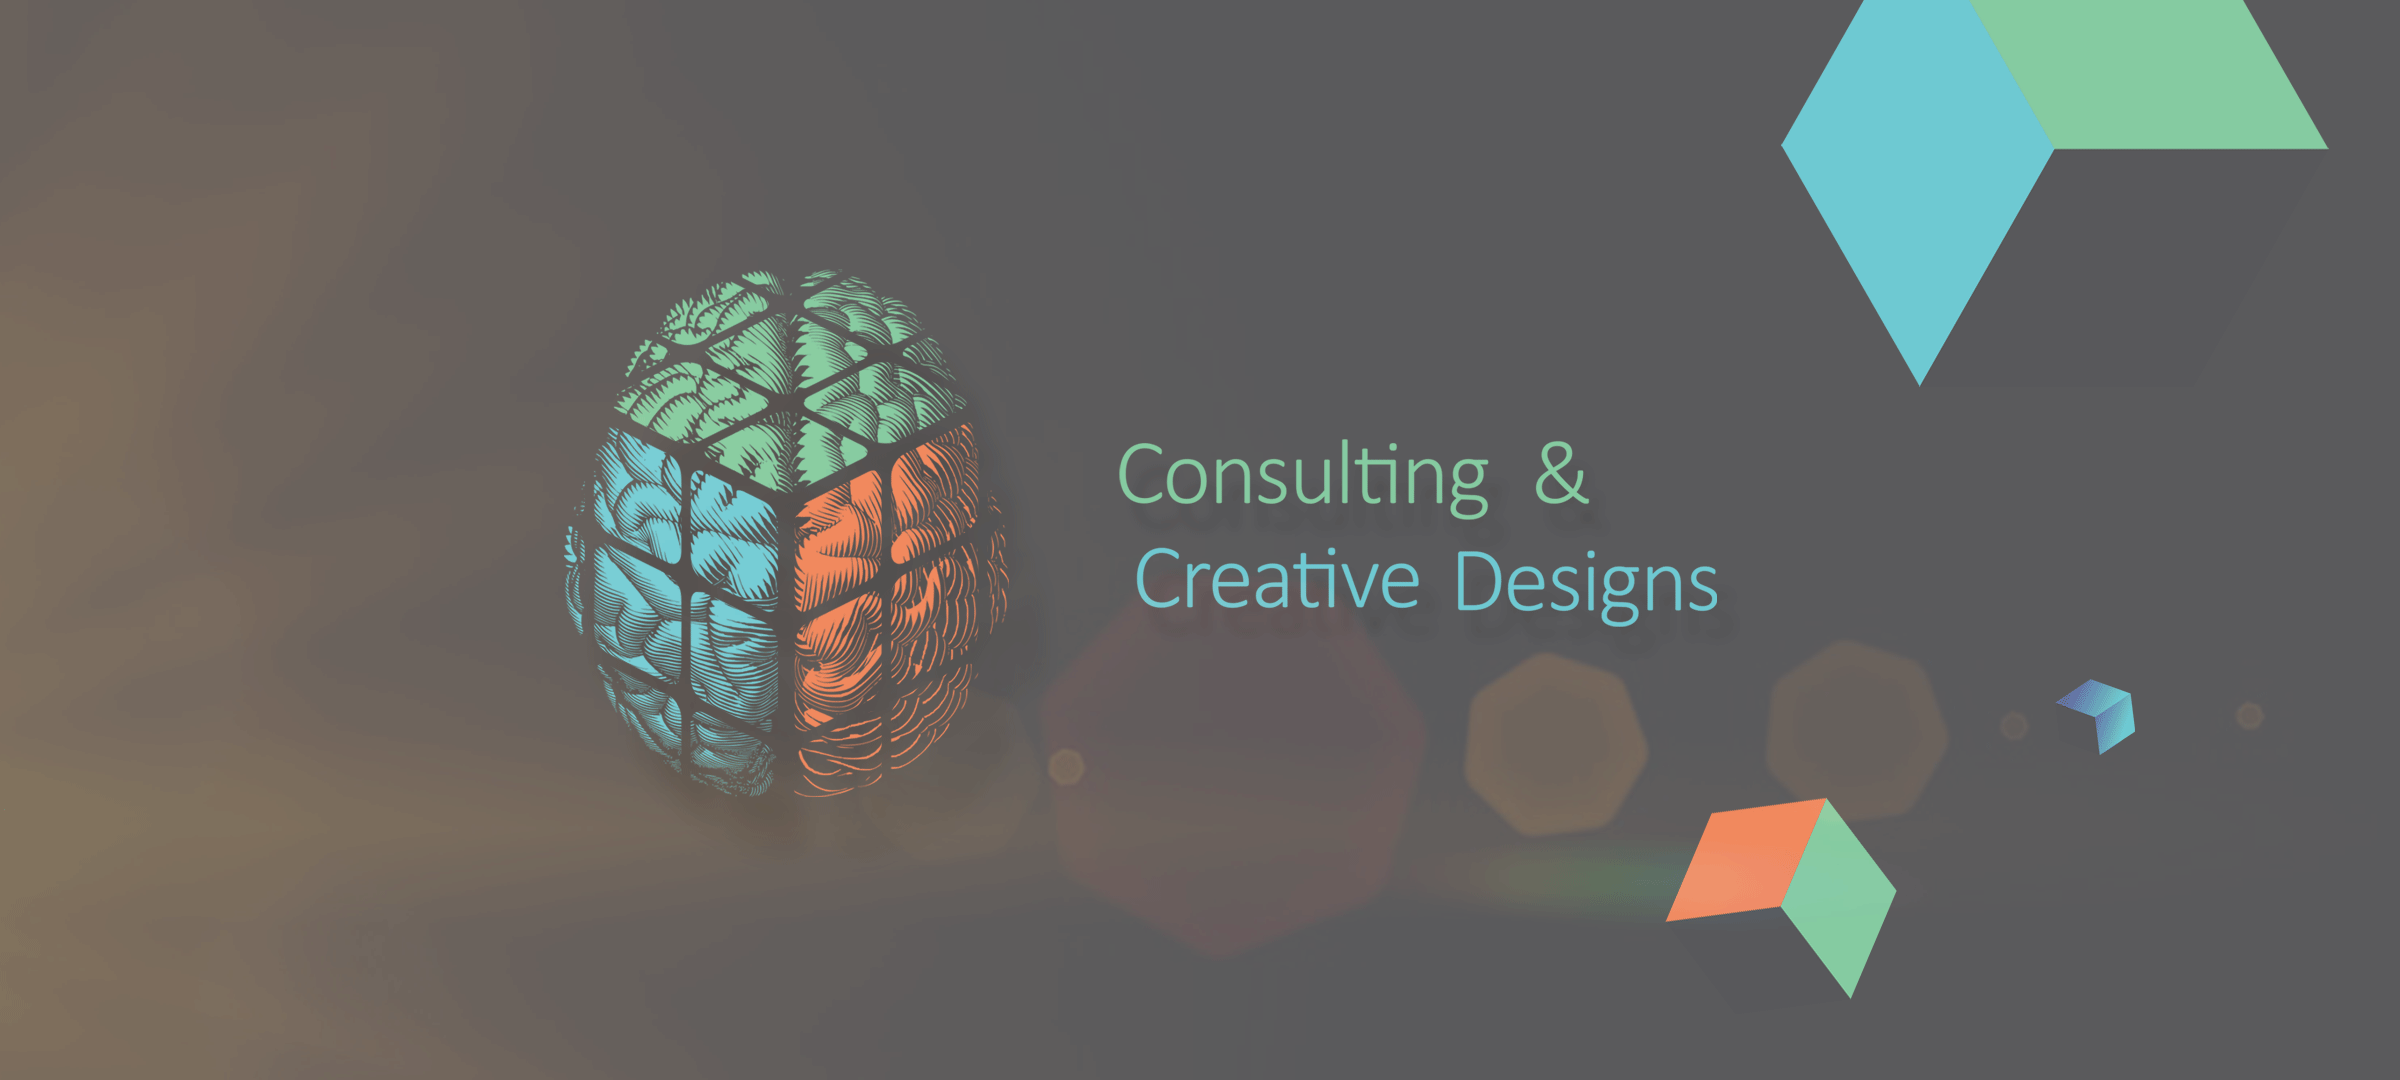 Consulting-Creative-for-site-01.png